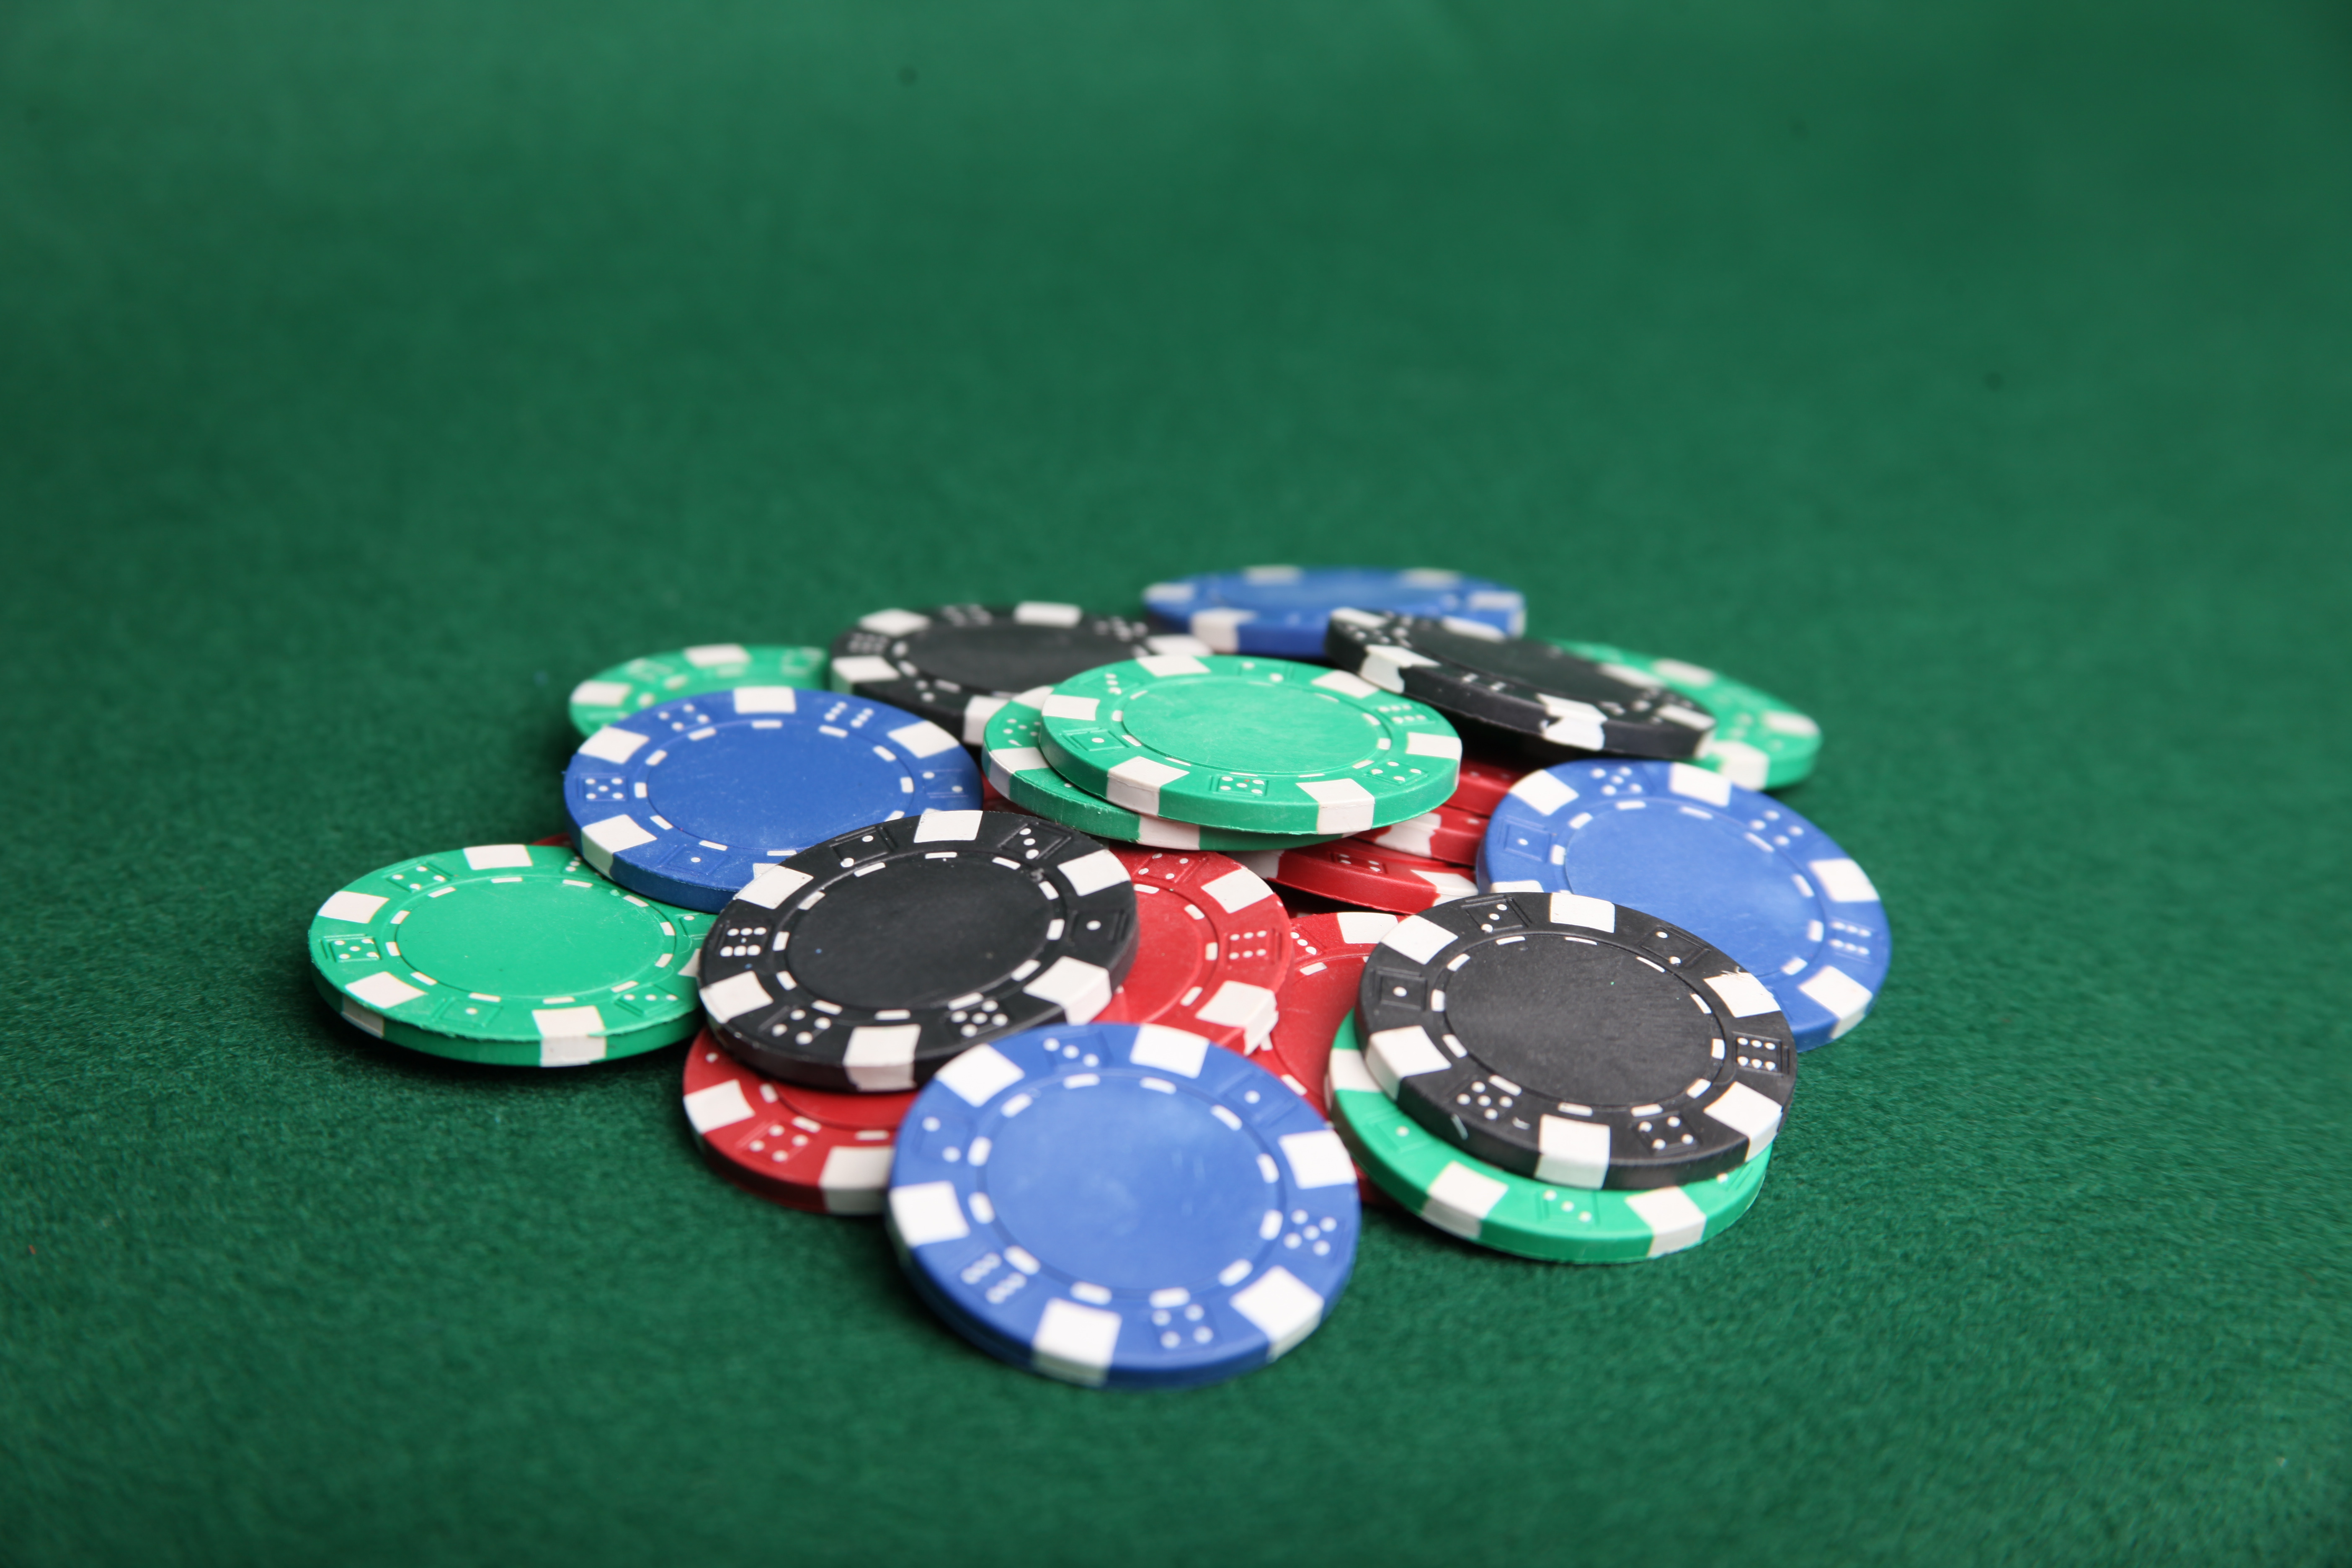 What Are Poker Chips Made Of